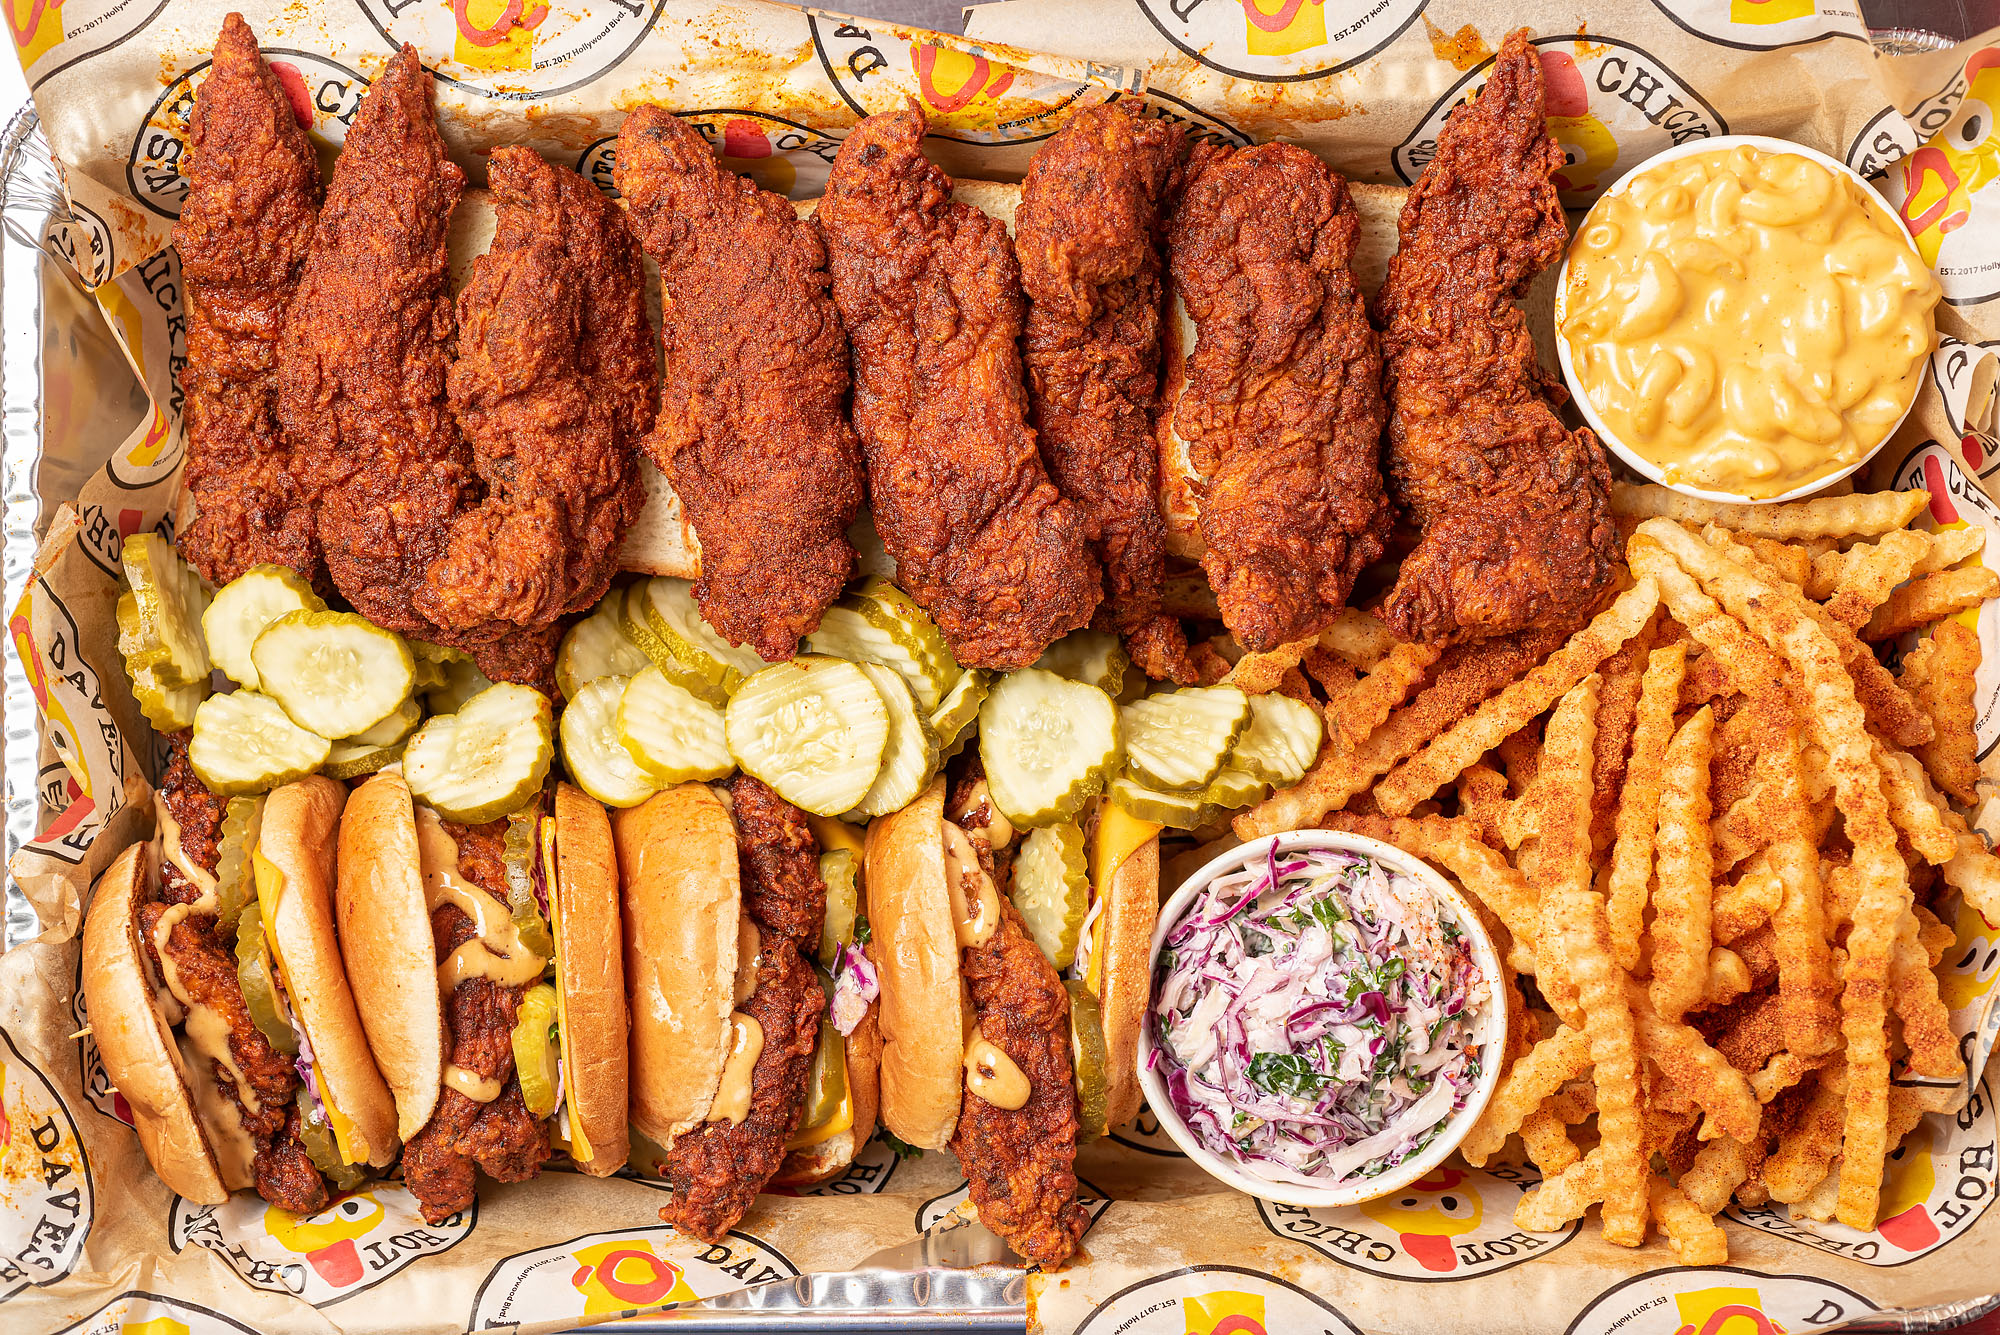 Hot chicken tenders on a tray divided by pickle chips with hot chicken sandwiches on the other side, french fries, cole slaw, and macaroni.